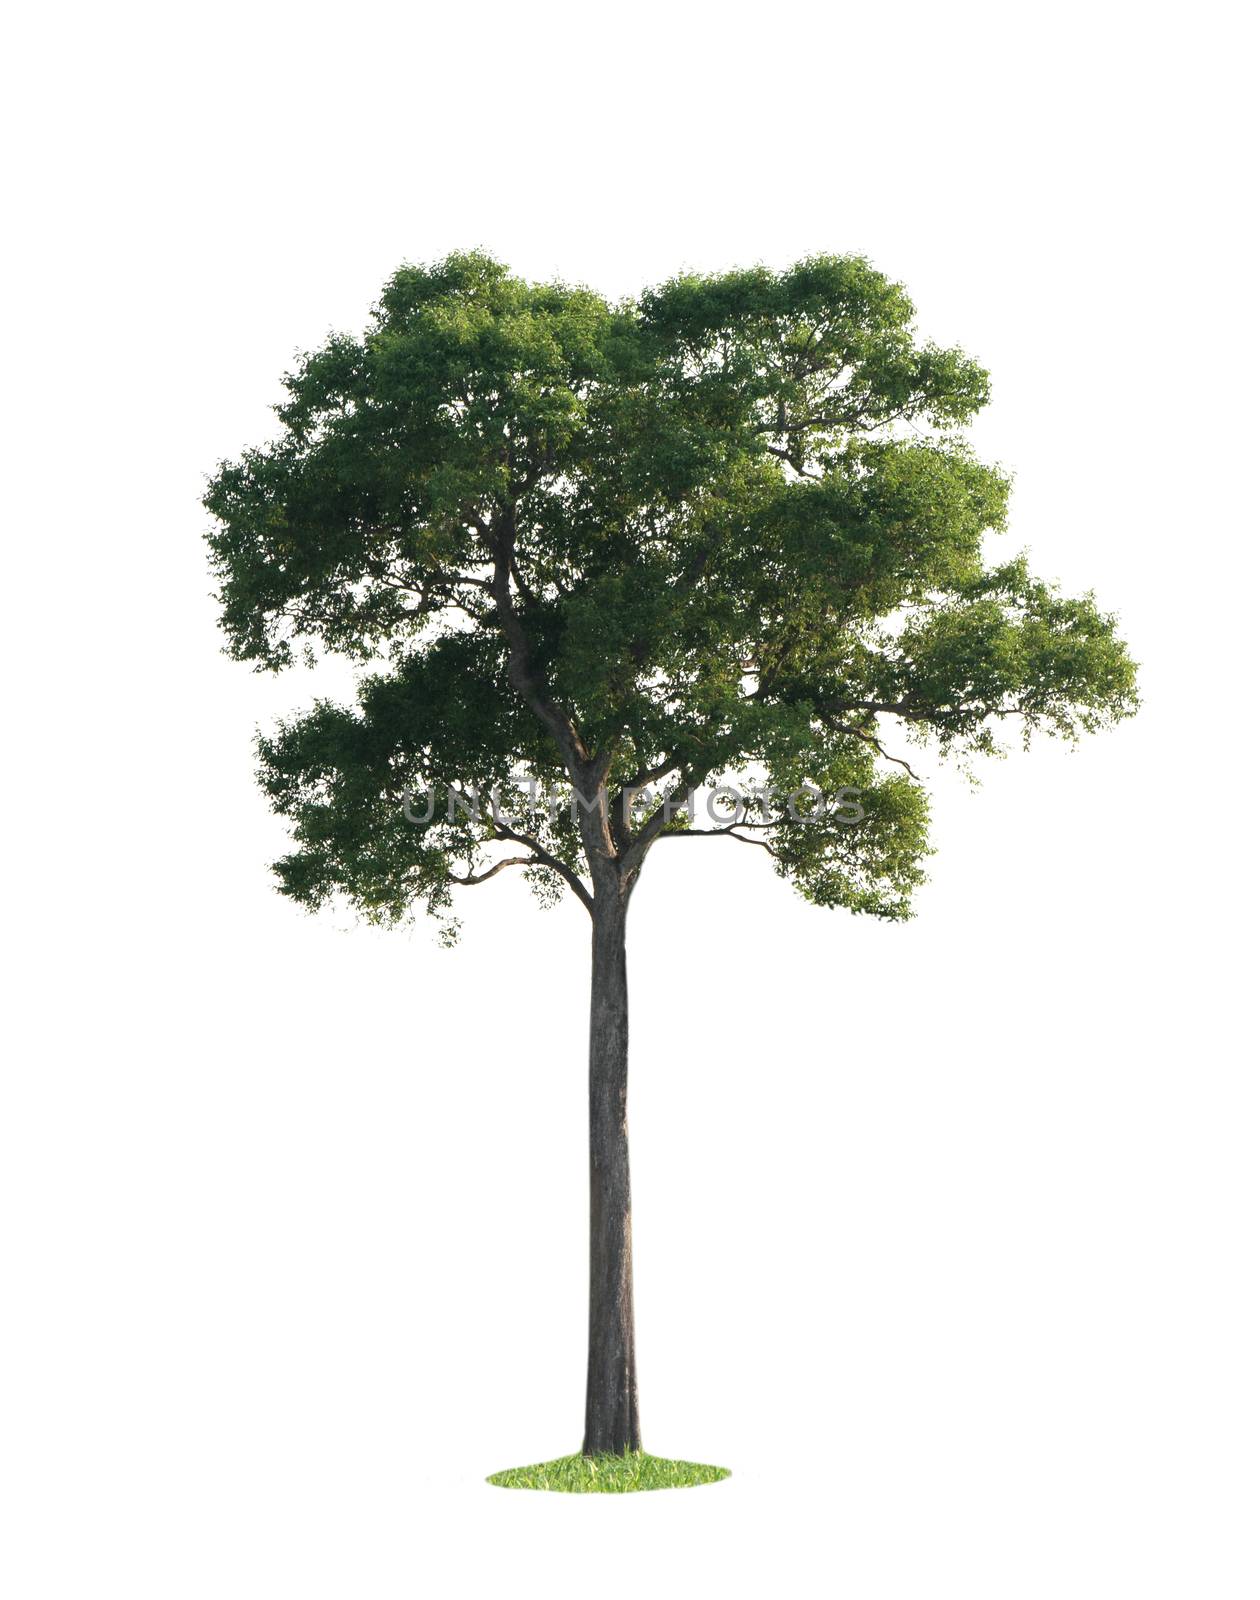 the big tree isolated on white background